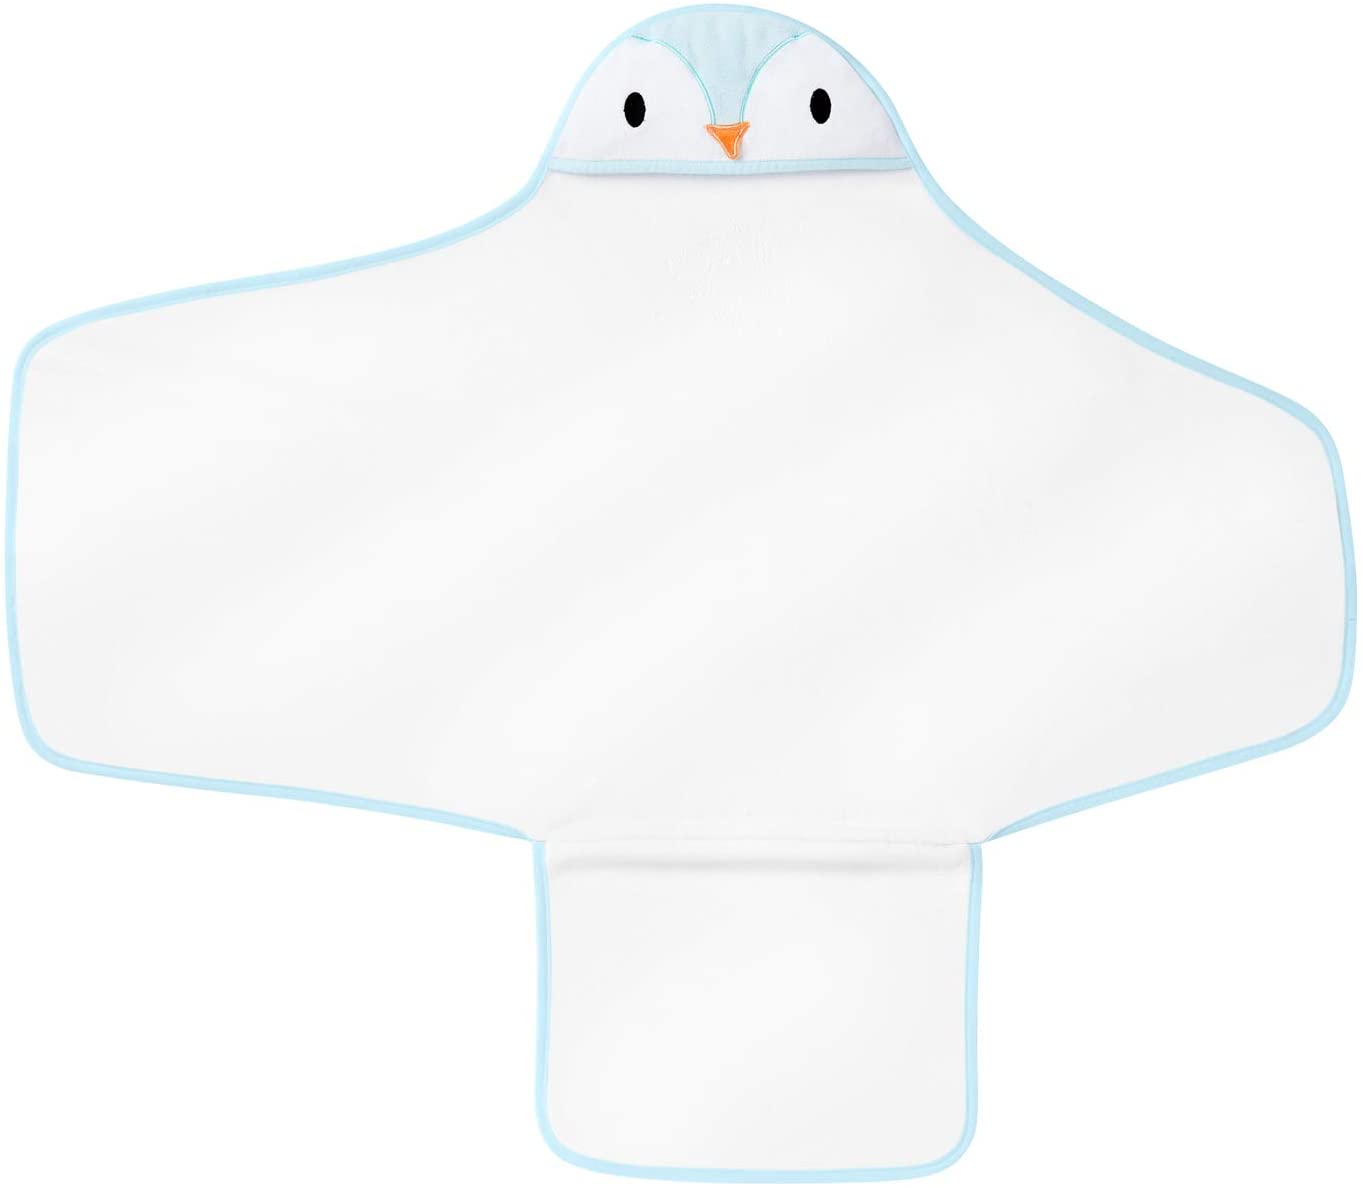 The penguin gro swaddle dry towel